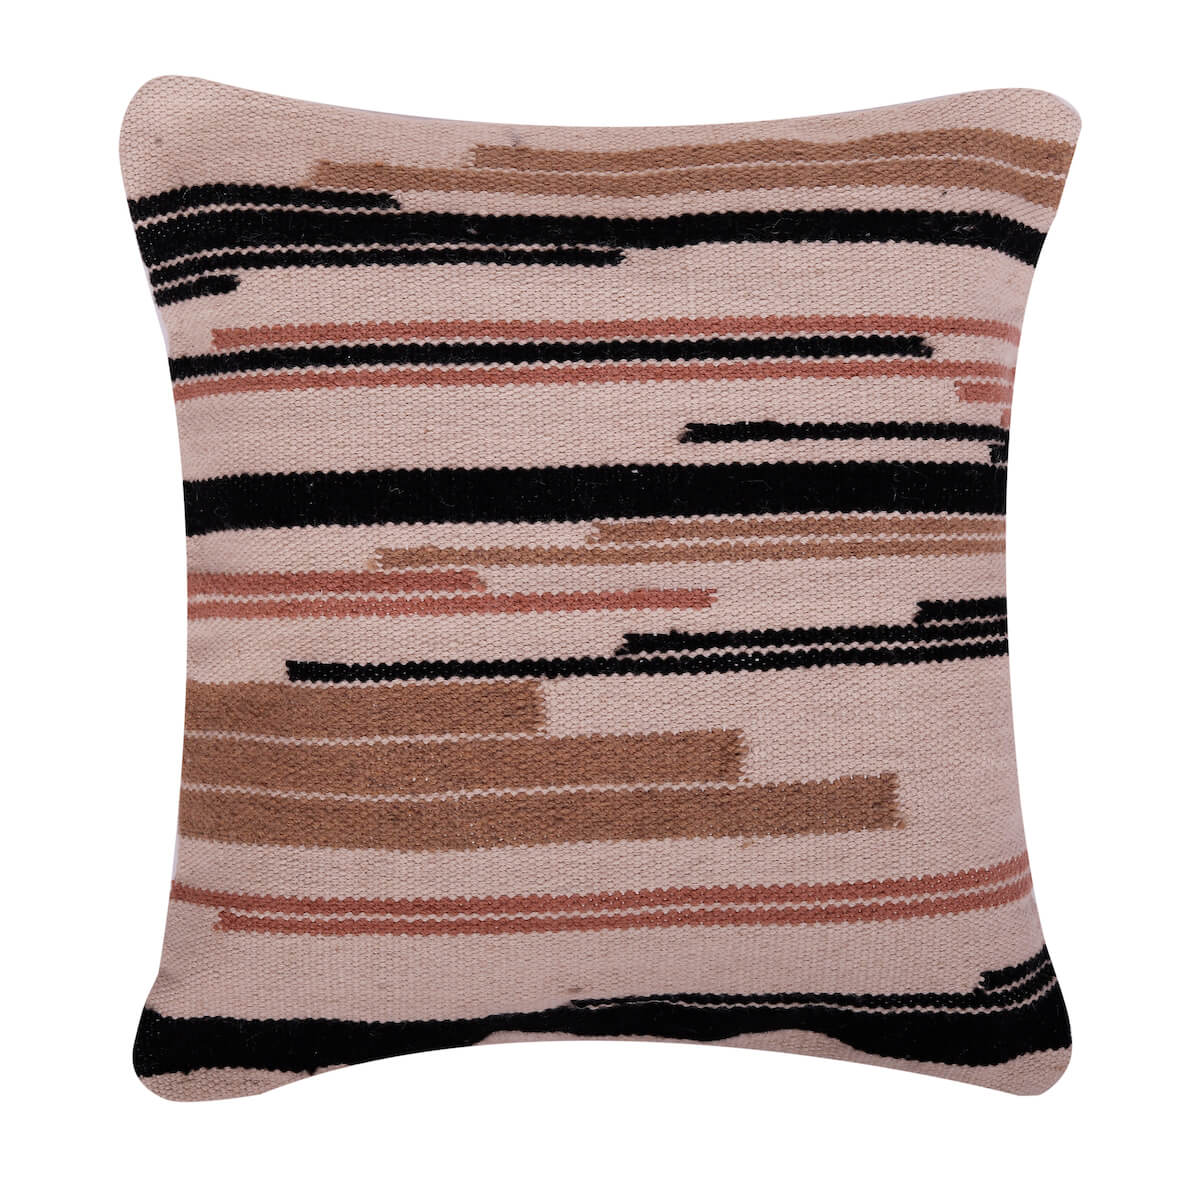 Textured Stripes Pattern Woven Handloom Multicolour Boho Look Cushion Cover Size 18"x18"